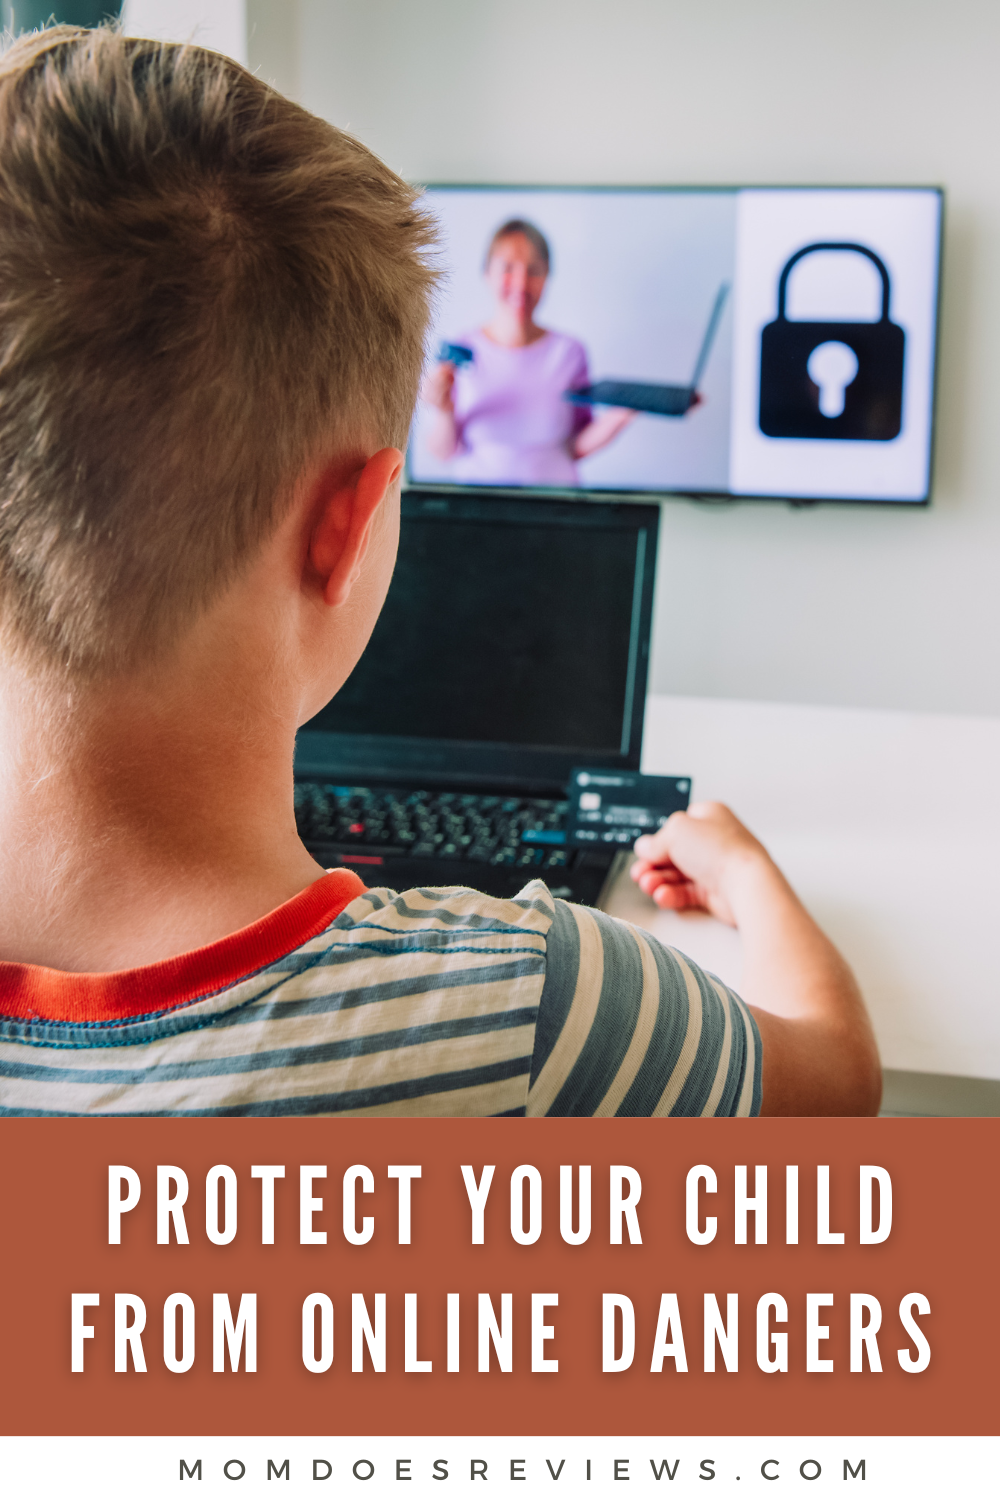 How to Protect Your Child from Unwanted Content and Online Dangers